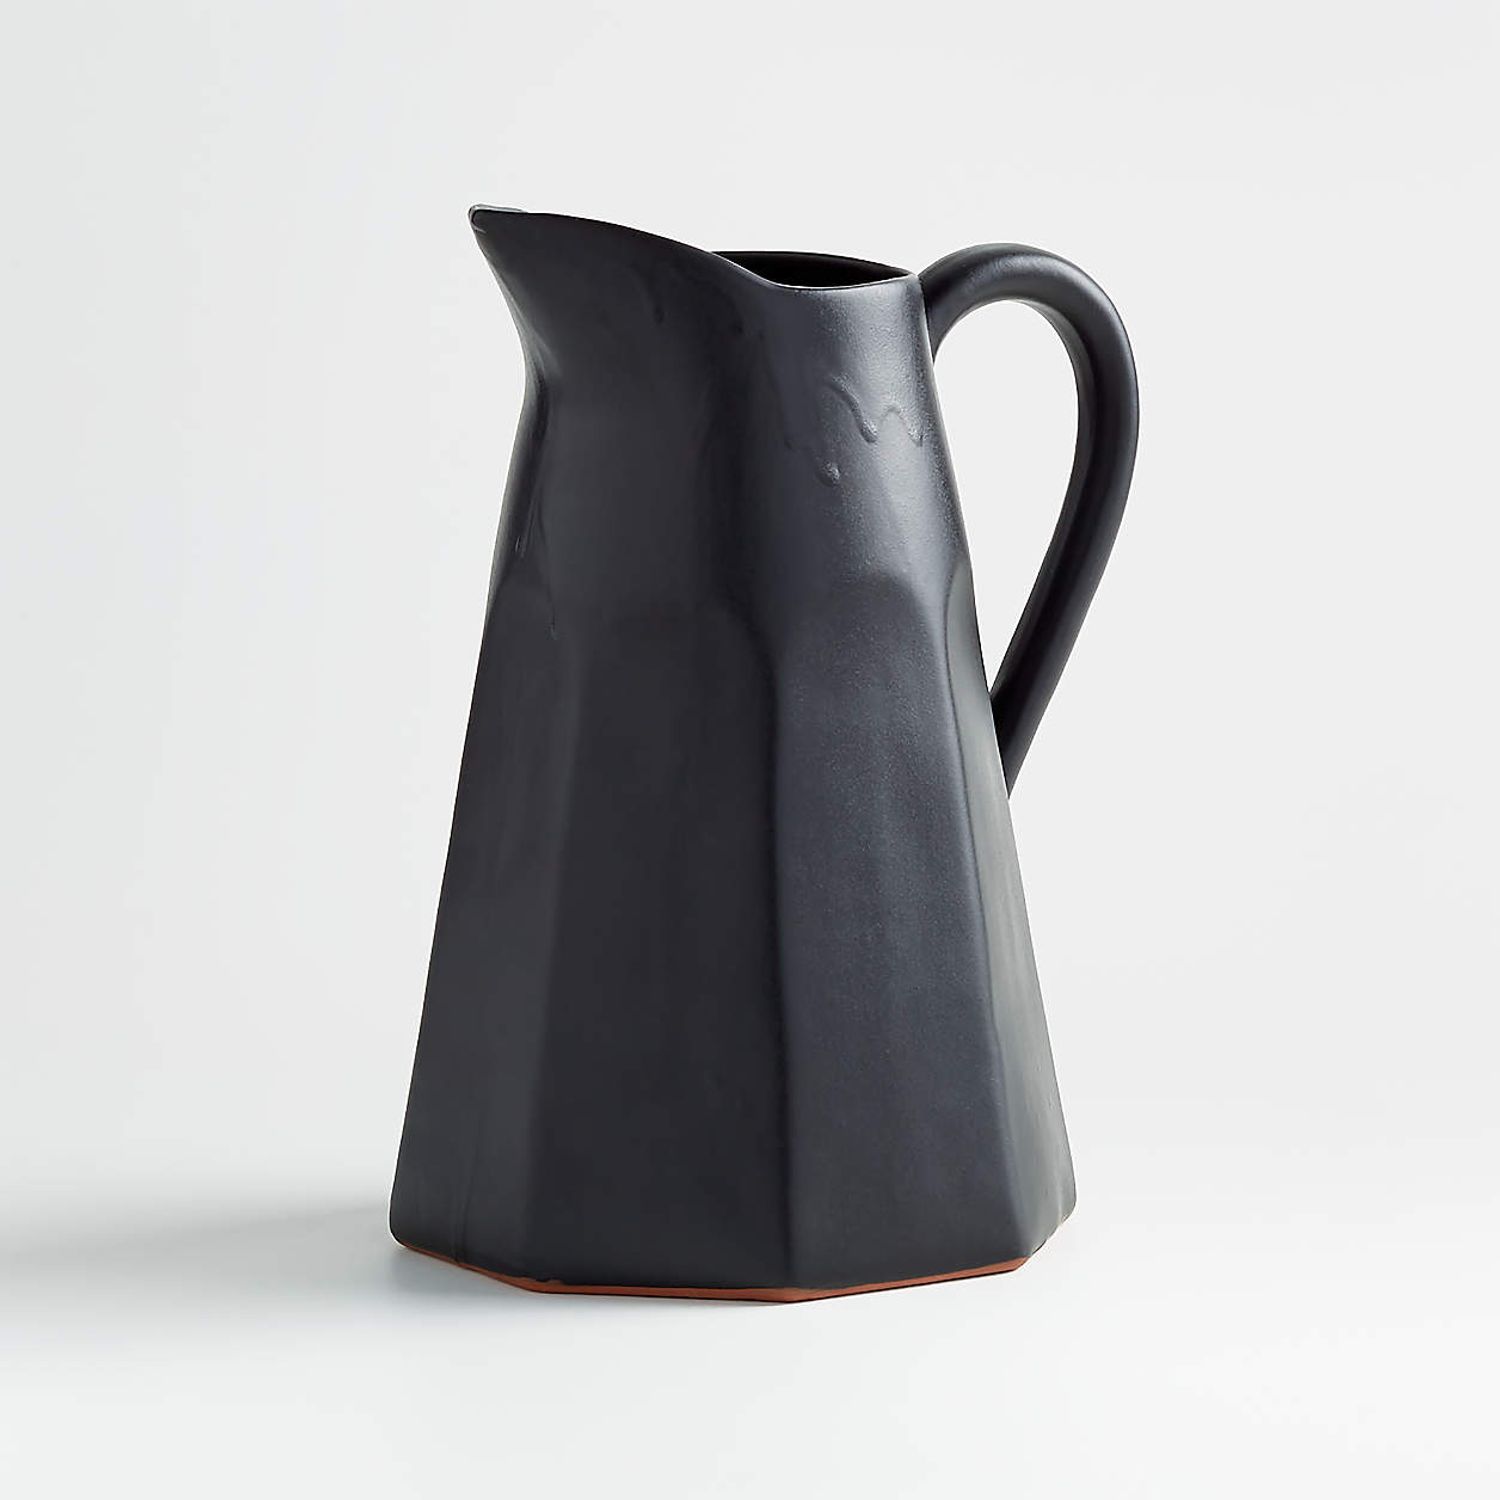 Shop Pitcher from Crate and Barrel on Openhaus